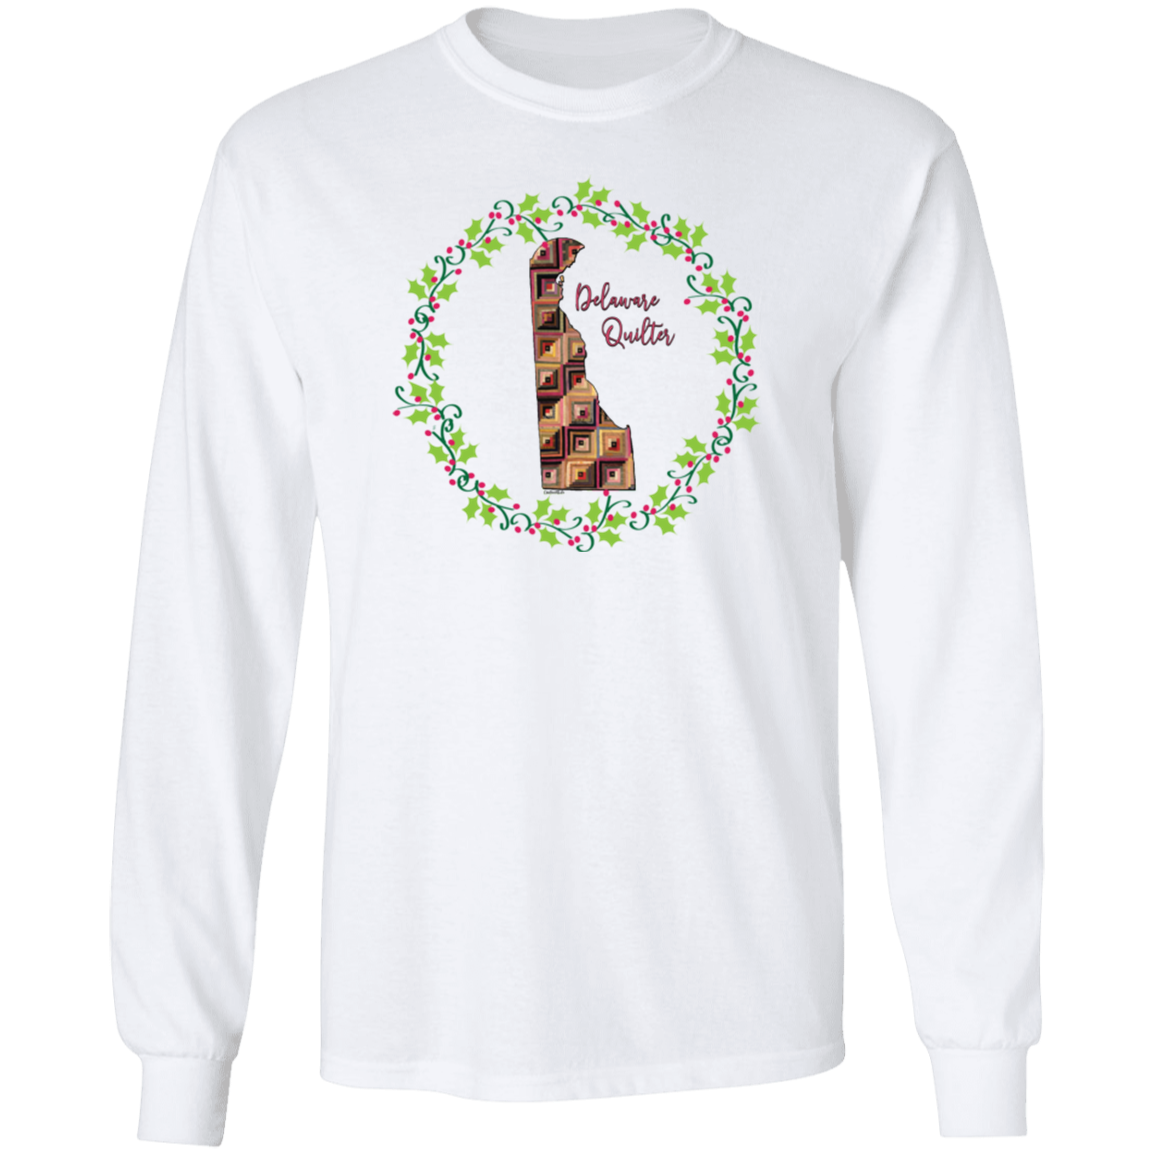 Delaware Quilter Christmas LS Ultra Cotton T-Shirt